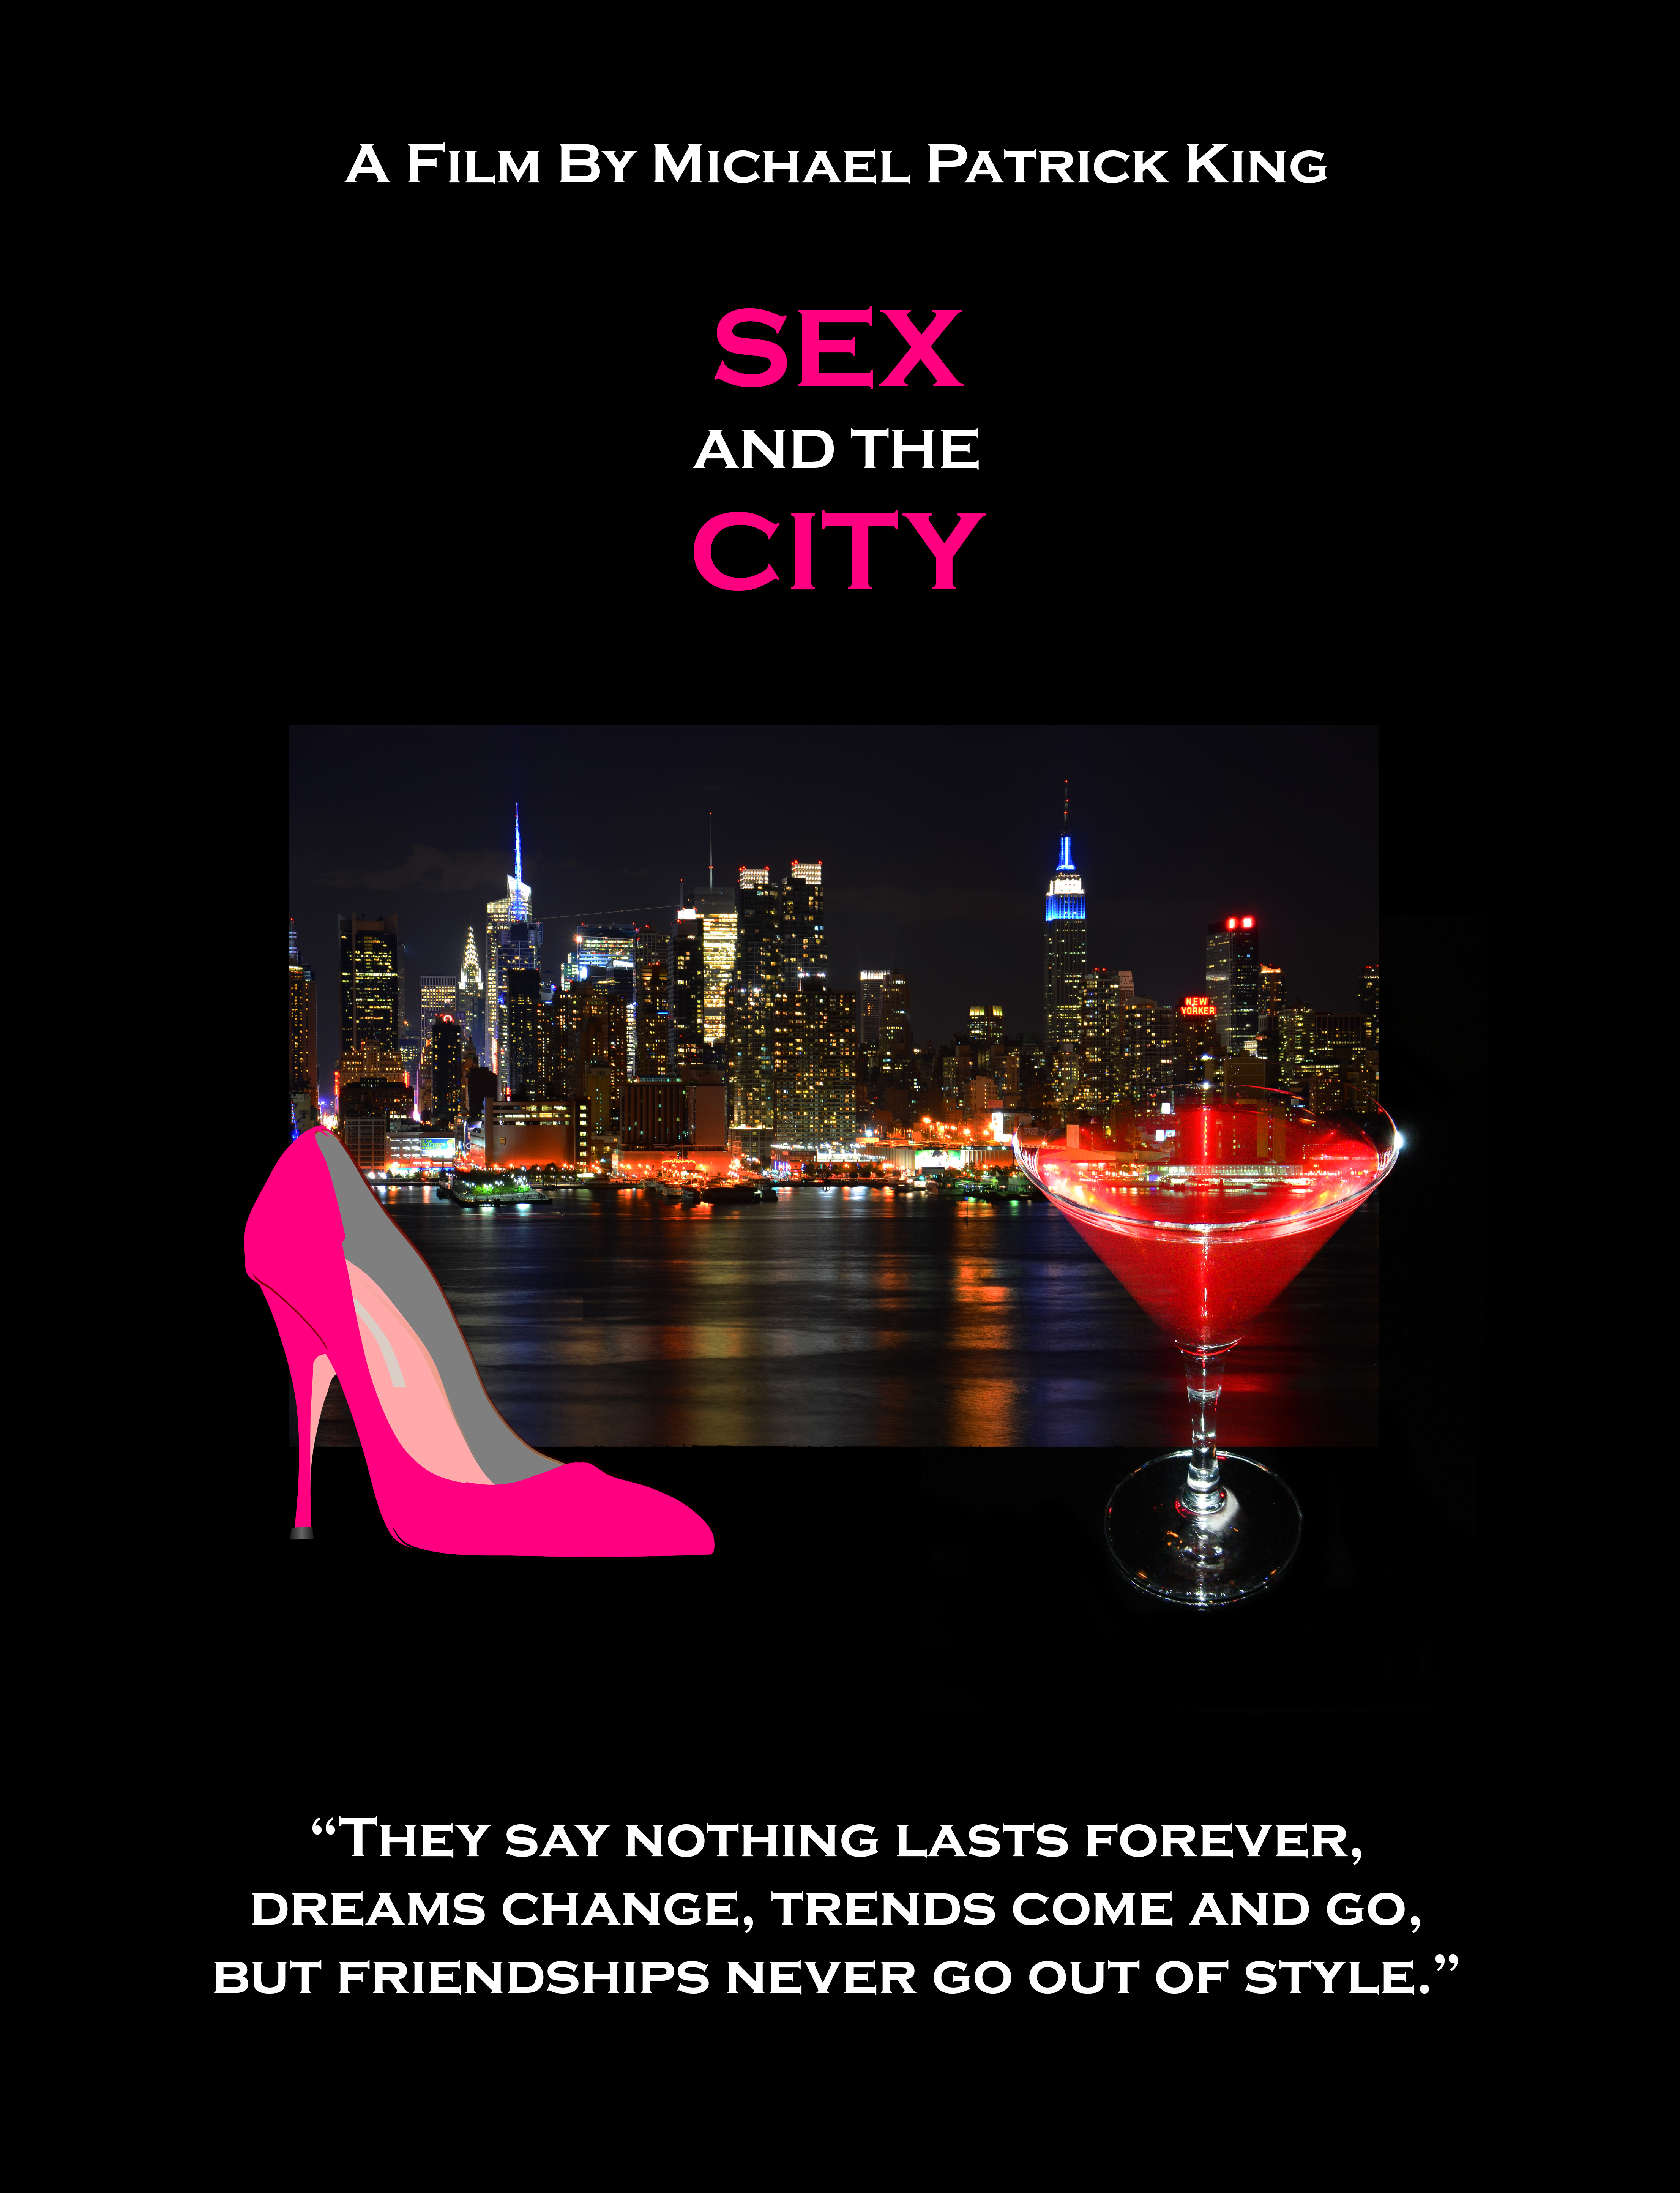 Sex and the city music photo